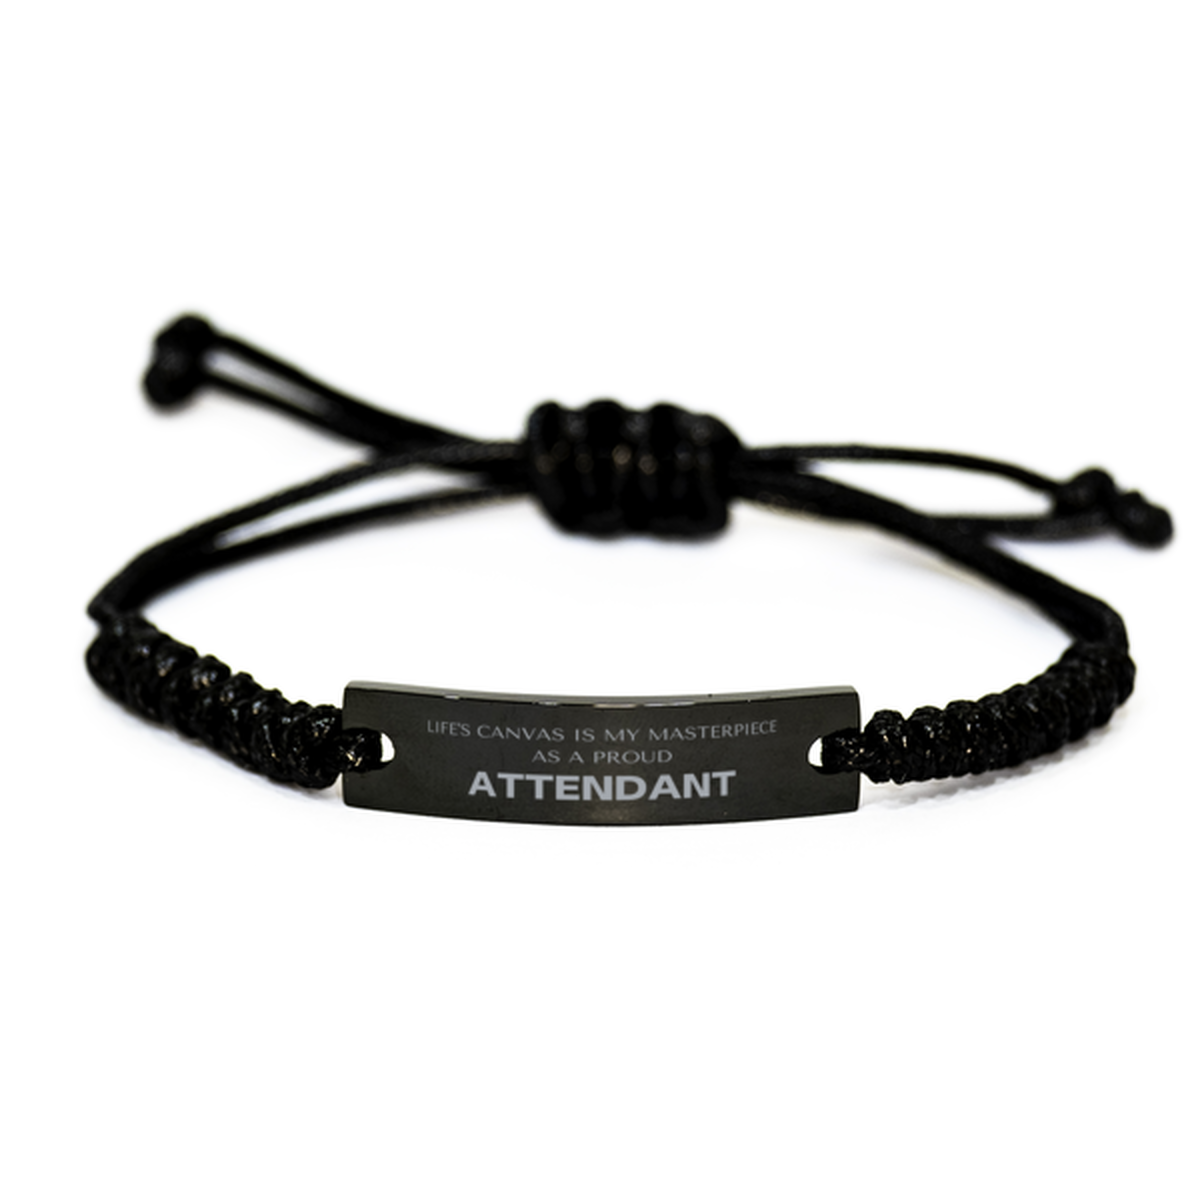 Proud Attendant Gifts, Life's canvas is my masterpiece, Epic Birthday Christmas Unique Black Rope Bracelet For Attendant, Coworkers, Men, Women, Friends